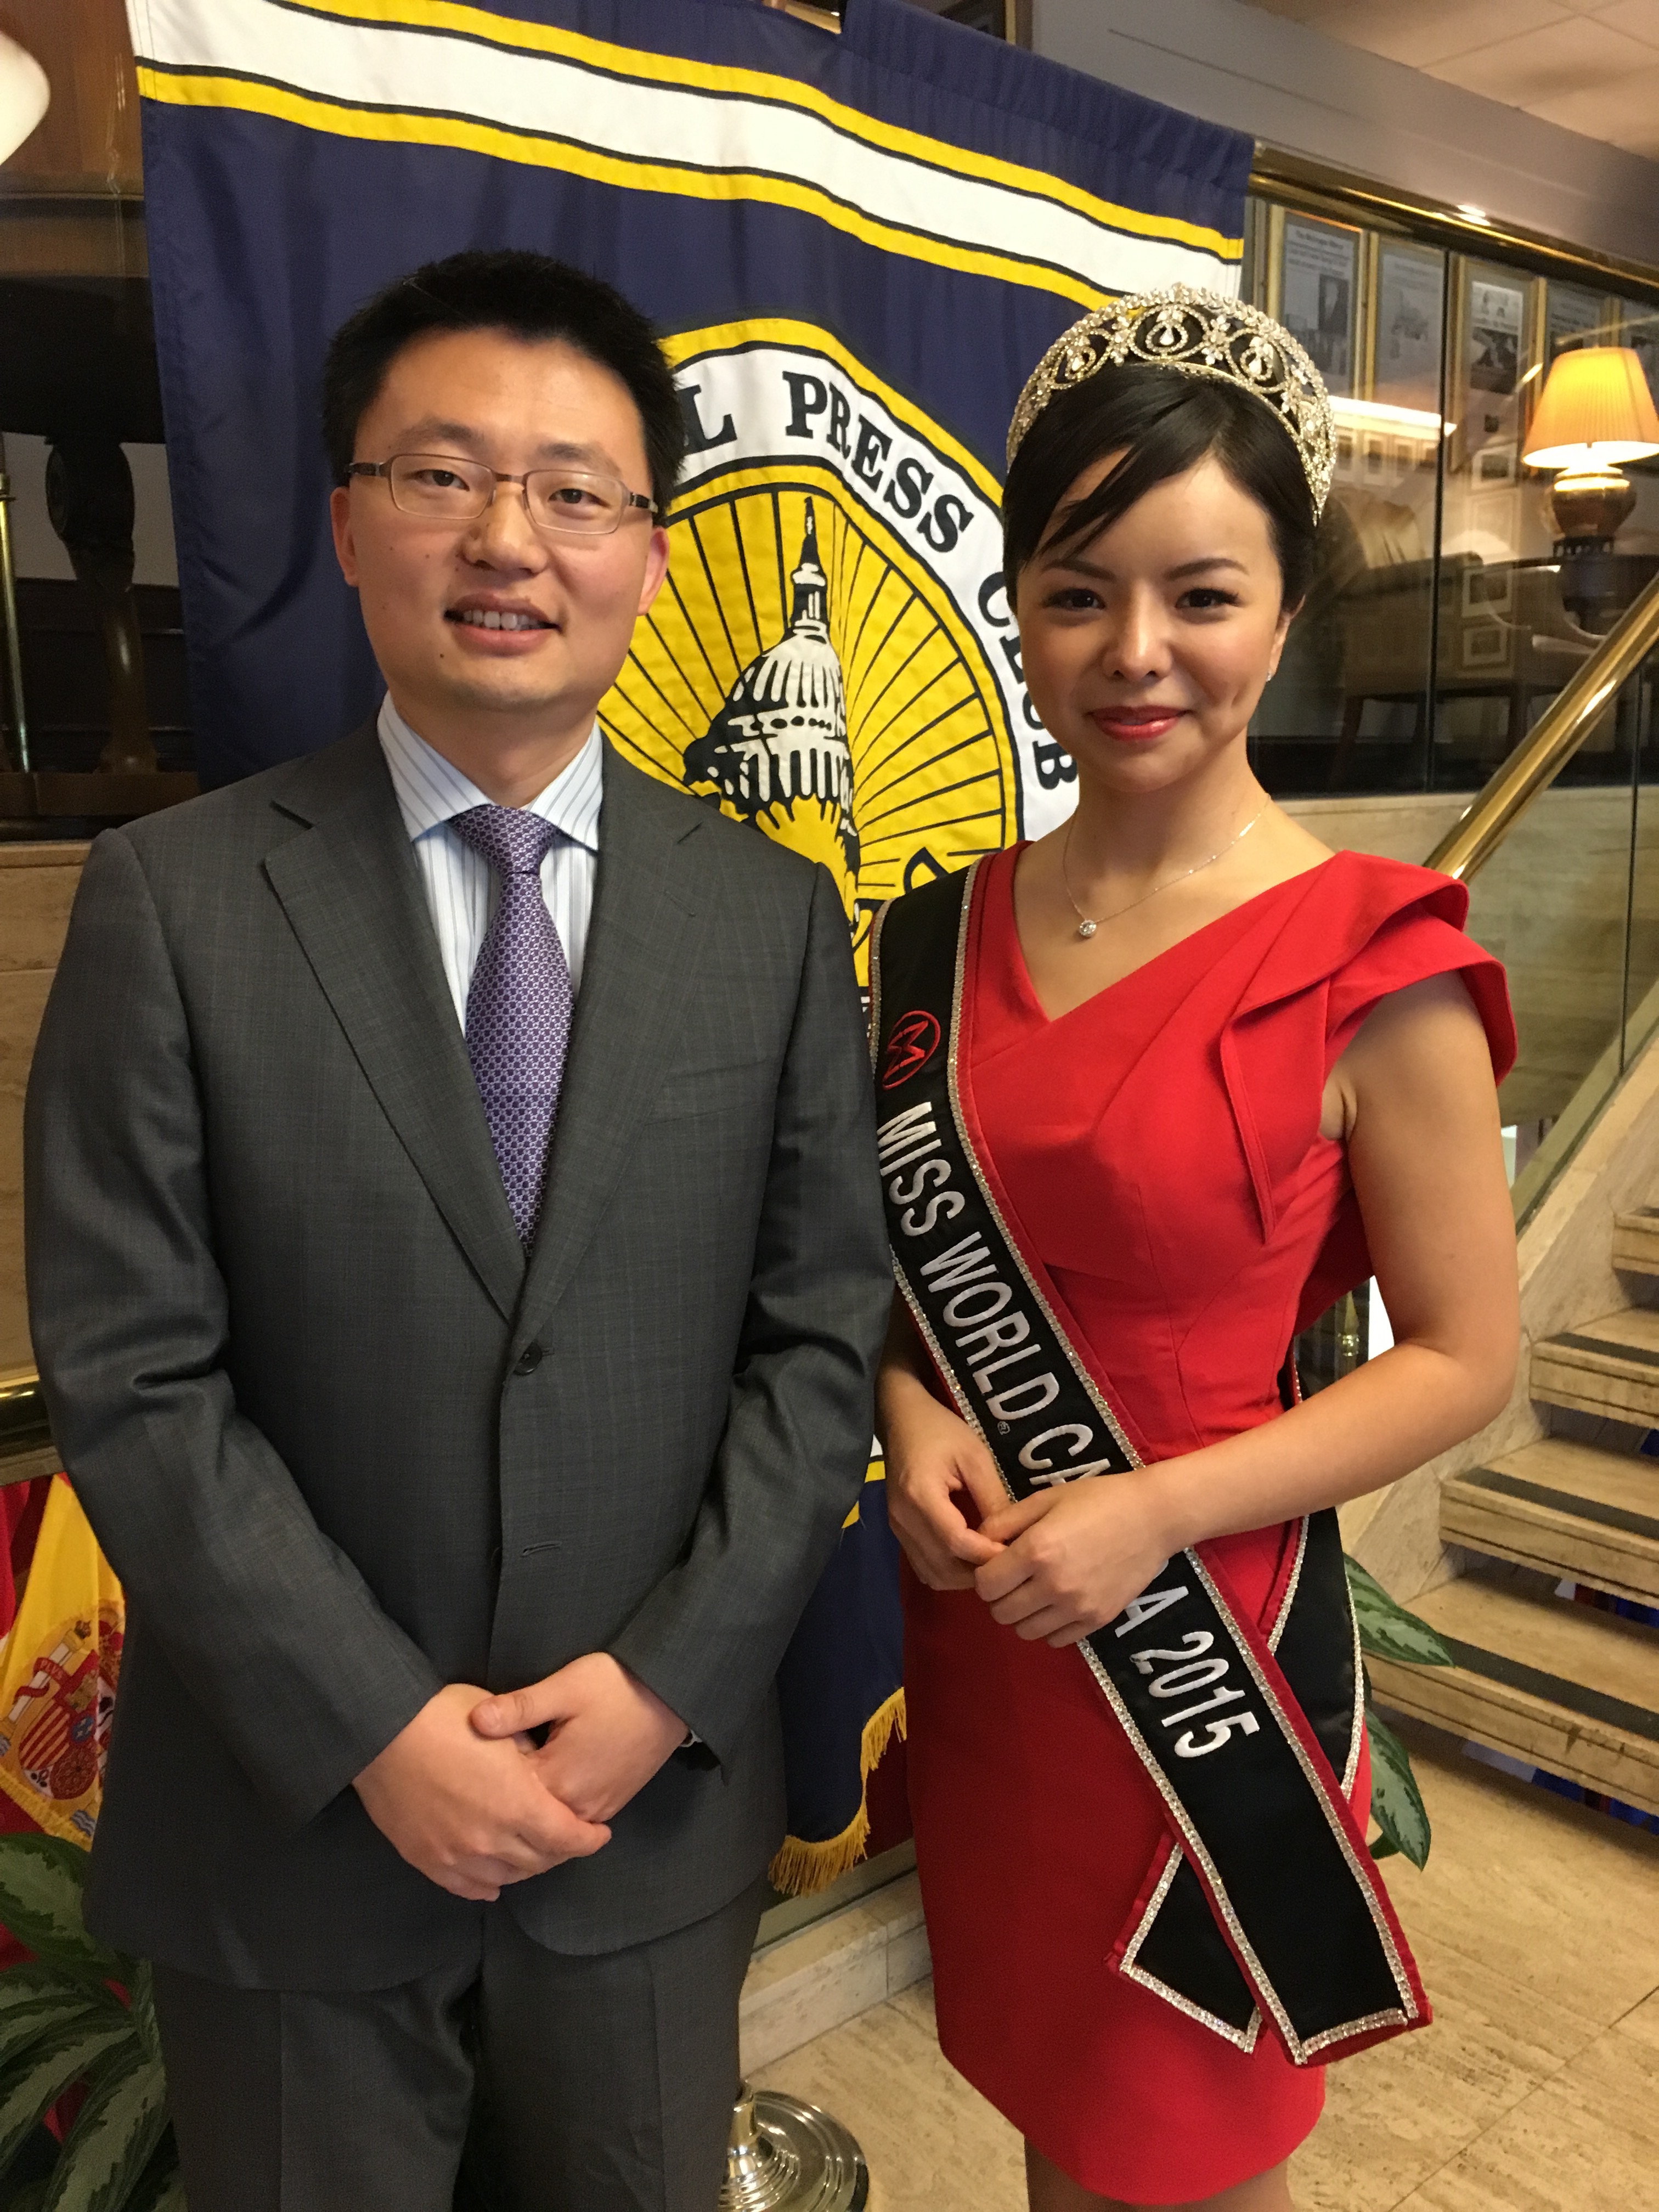 Director Leon Lee and Miss World Canada 2015 Anastasia Lin at the National Press Club in Washington DC.